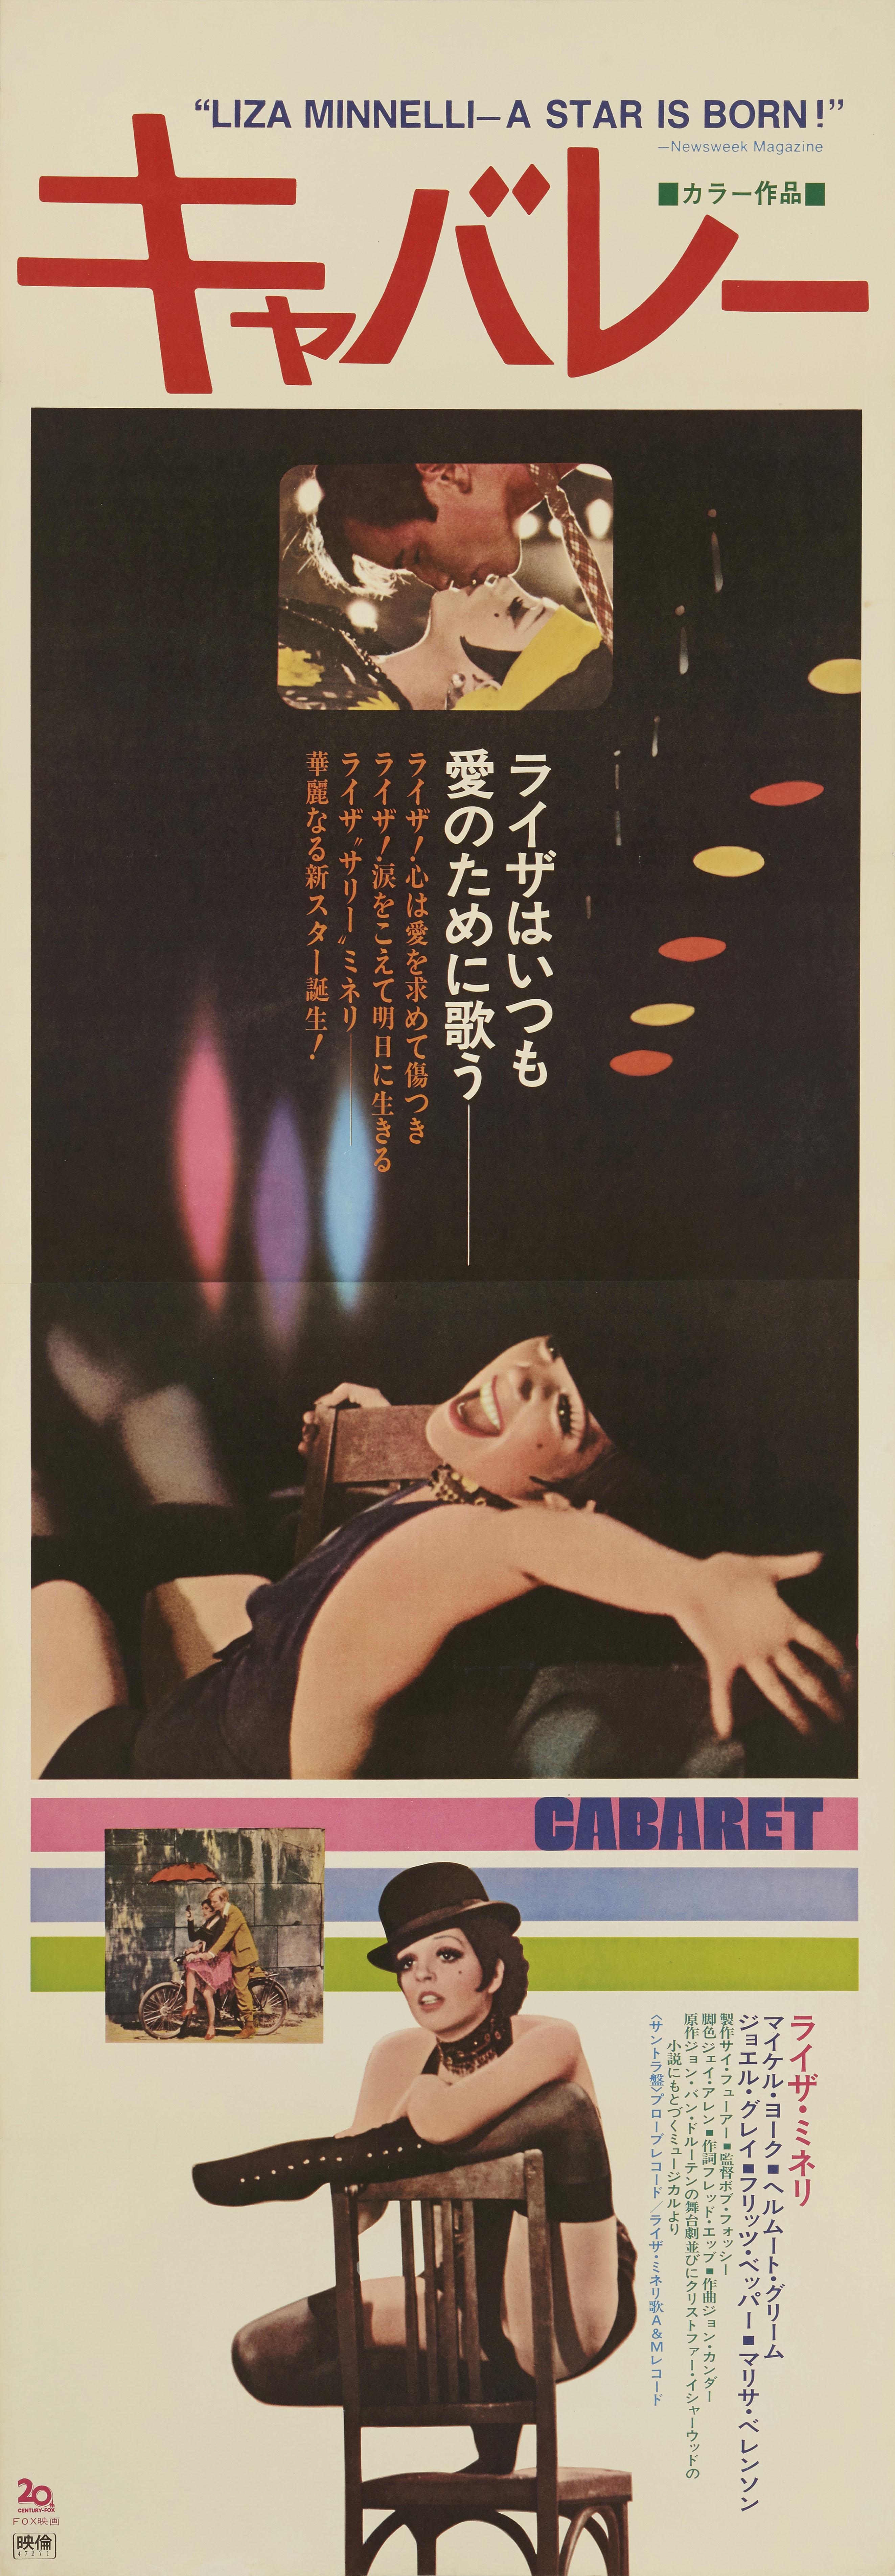 Original Japanese film poster for Bob Fosse's 1972 Classic musical starring Liza Minnelli, Michael York and Joel Grey.
This poster is unfolded and conservation linen backed it would be shipped rolled in a very strong tube.